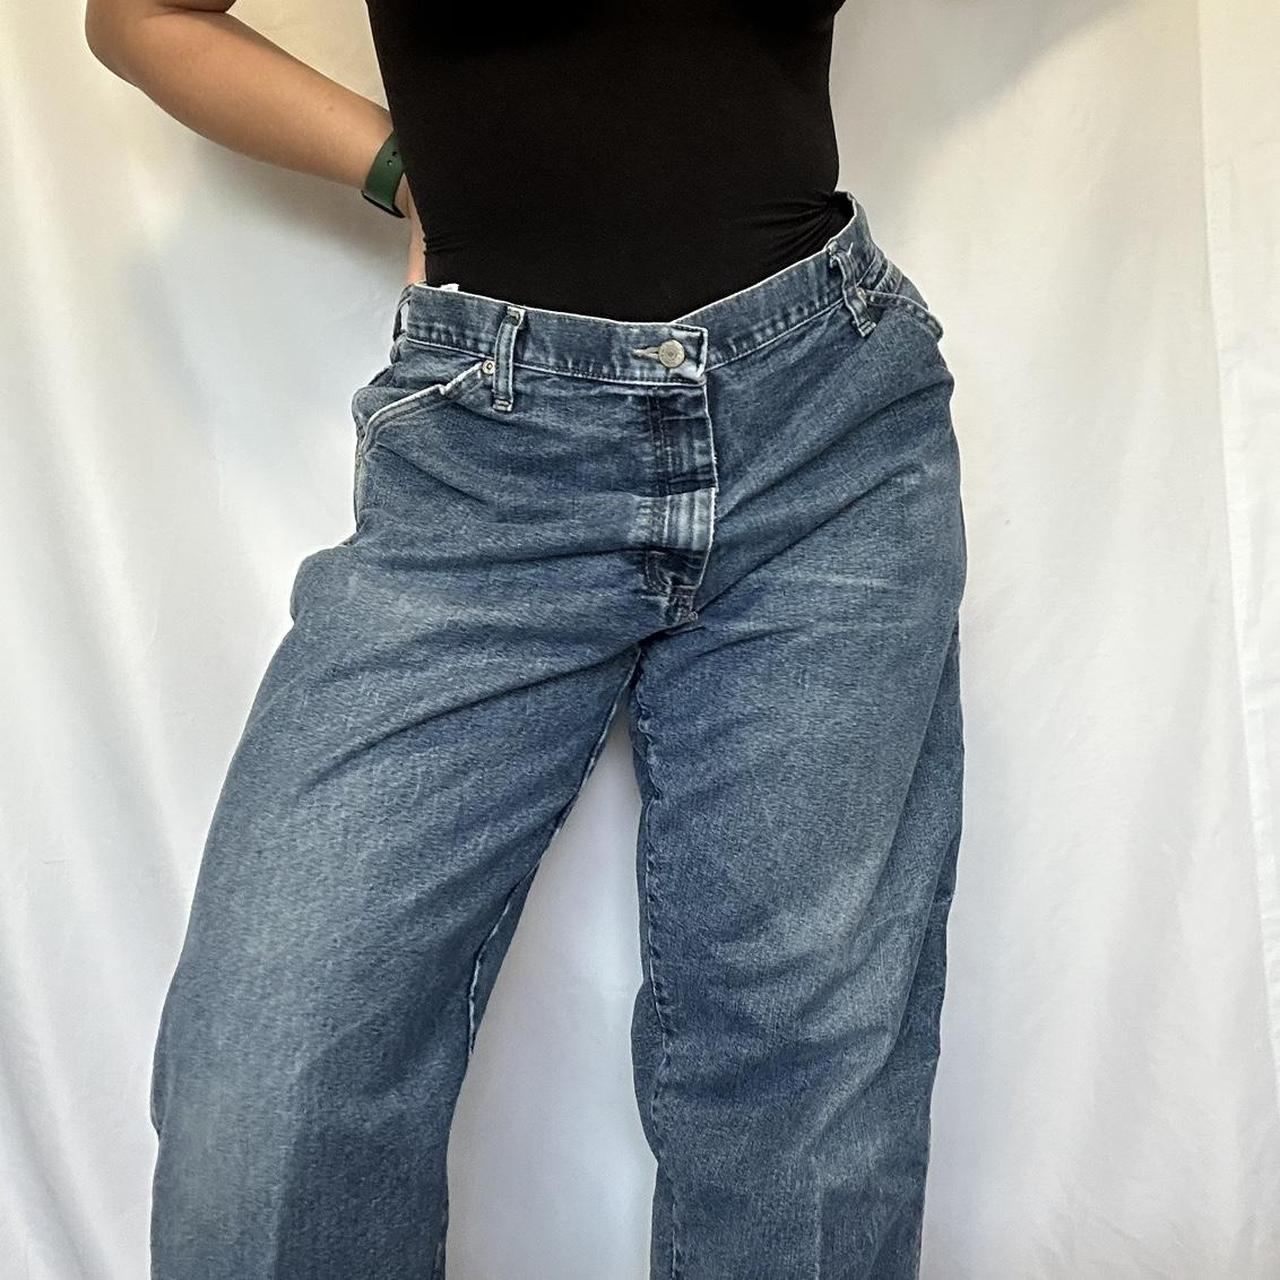 Wrangler Carpenter jeans These jeans are so cute &... - Depop